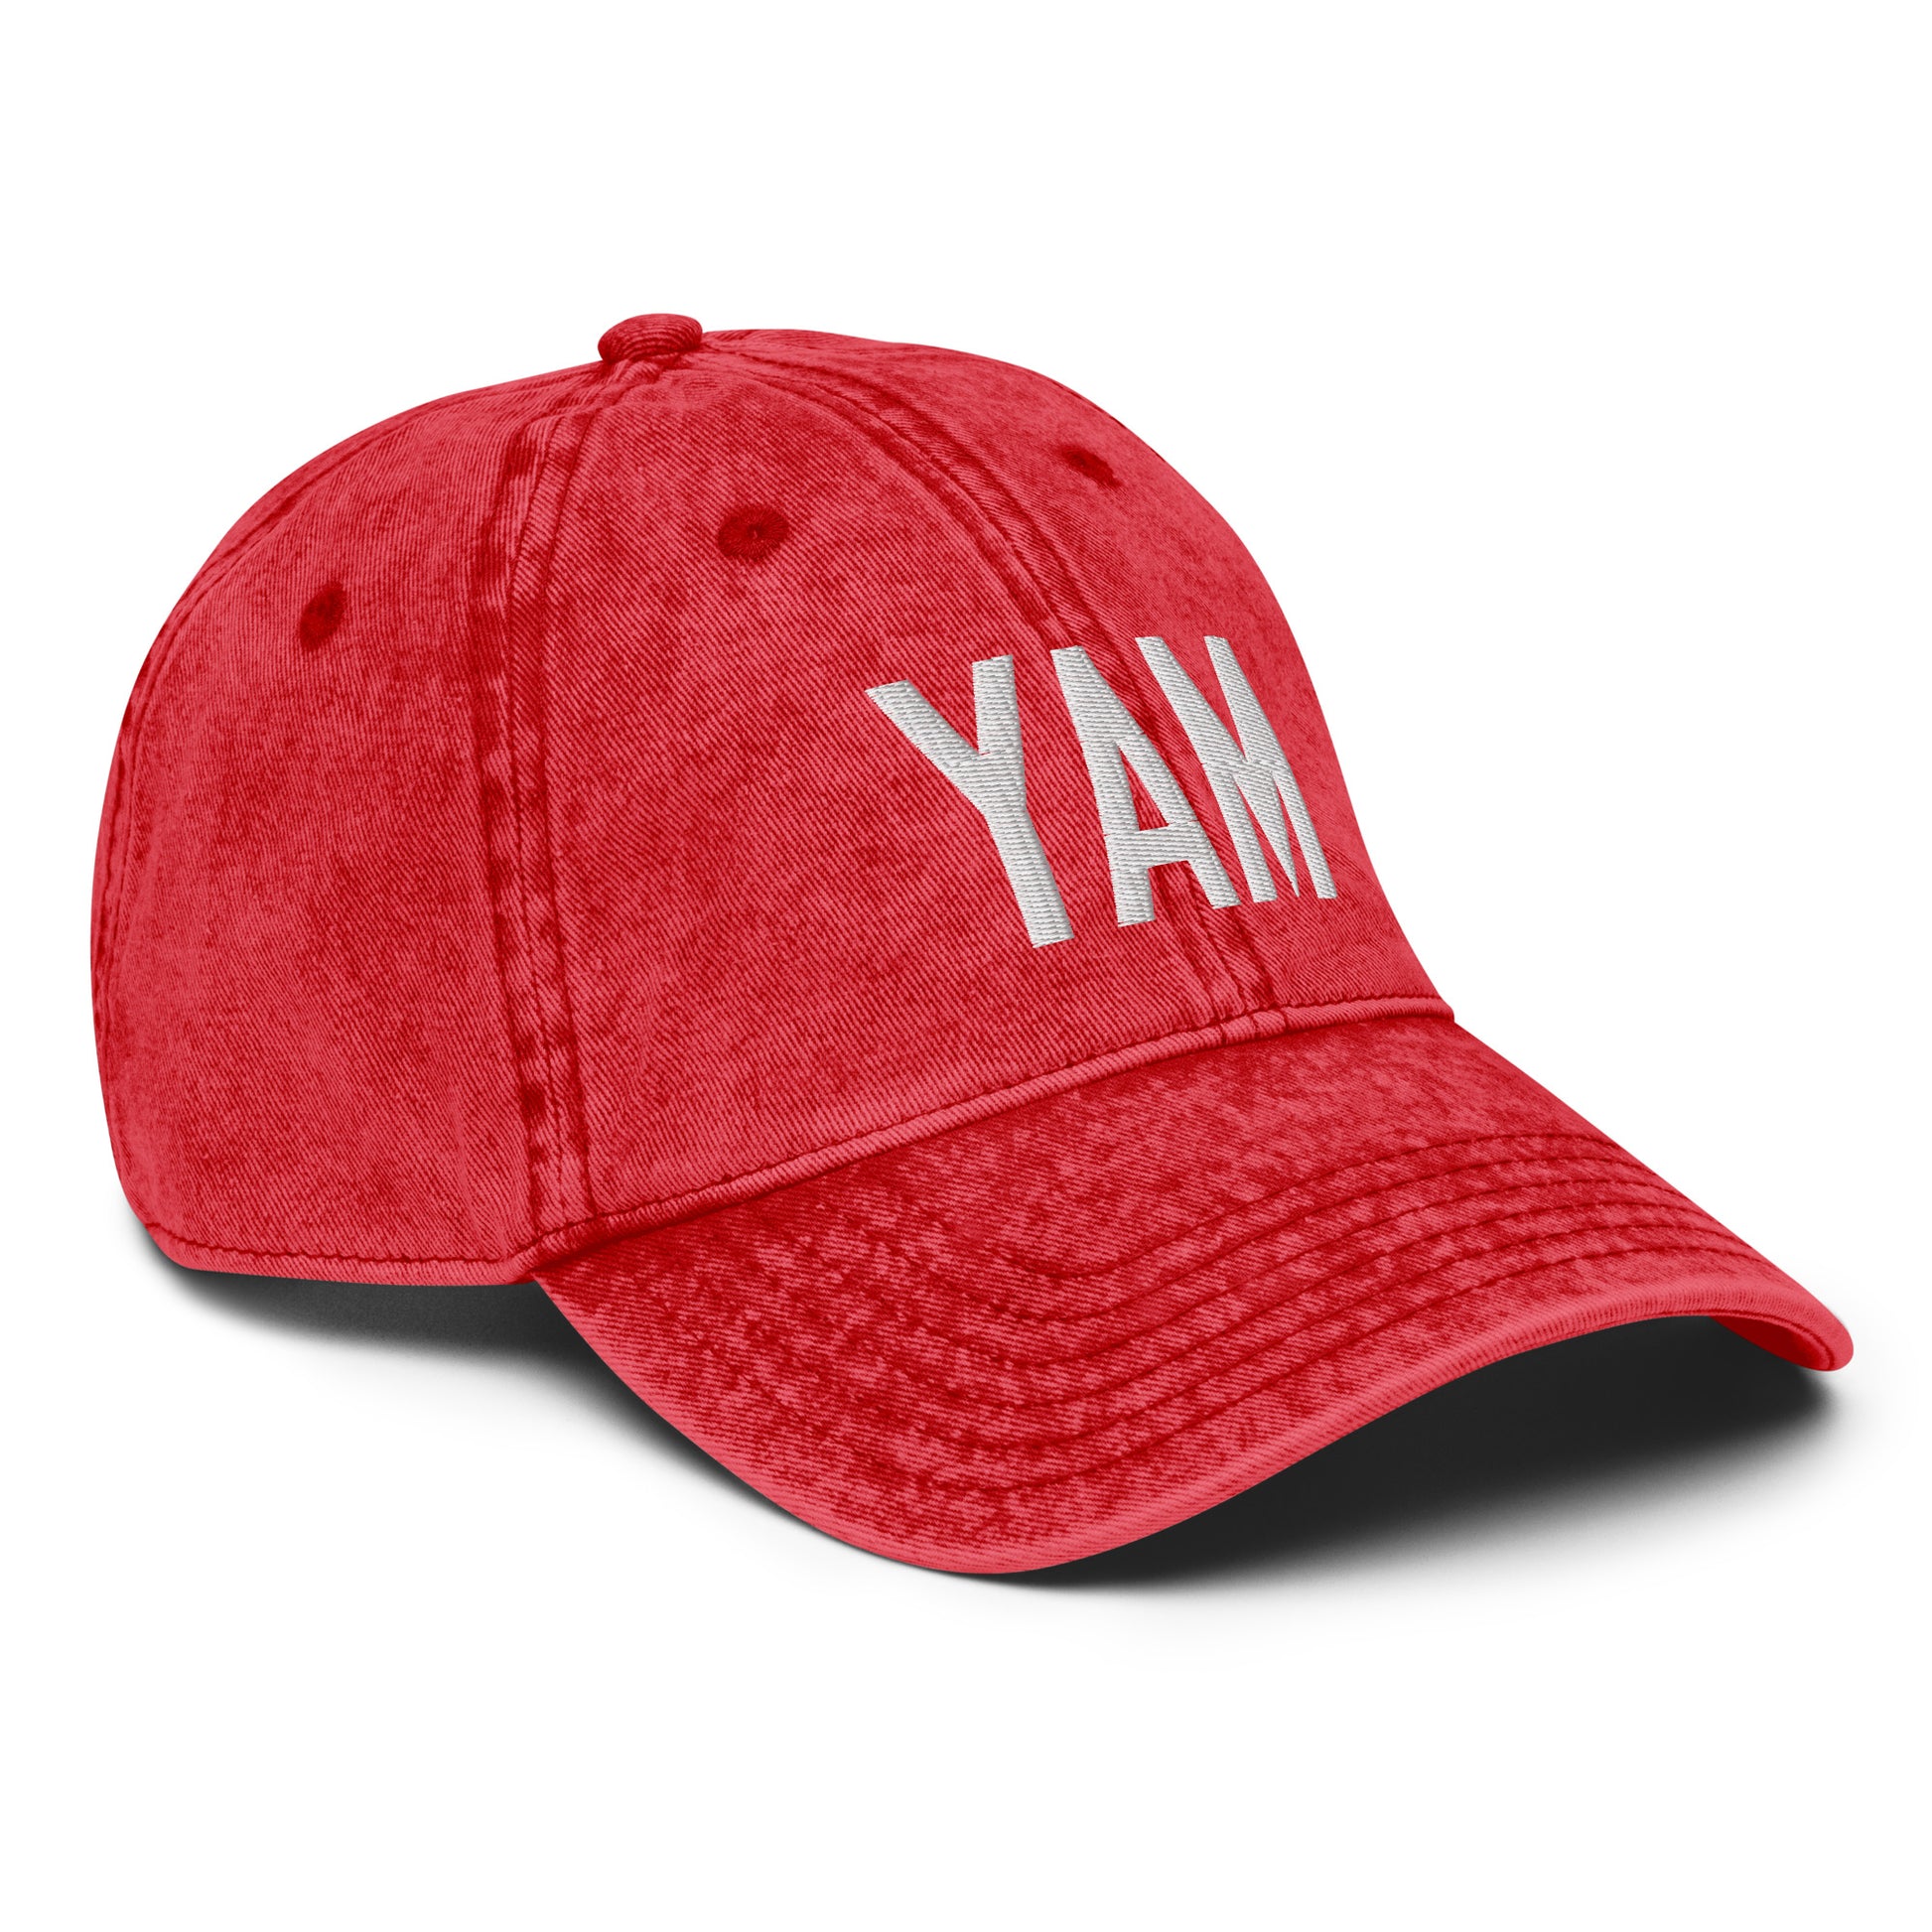 Airport Code Twill Cap - White • YAM Sault-Ste-Marie • YHM Designs - Image 24